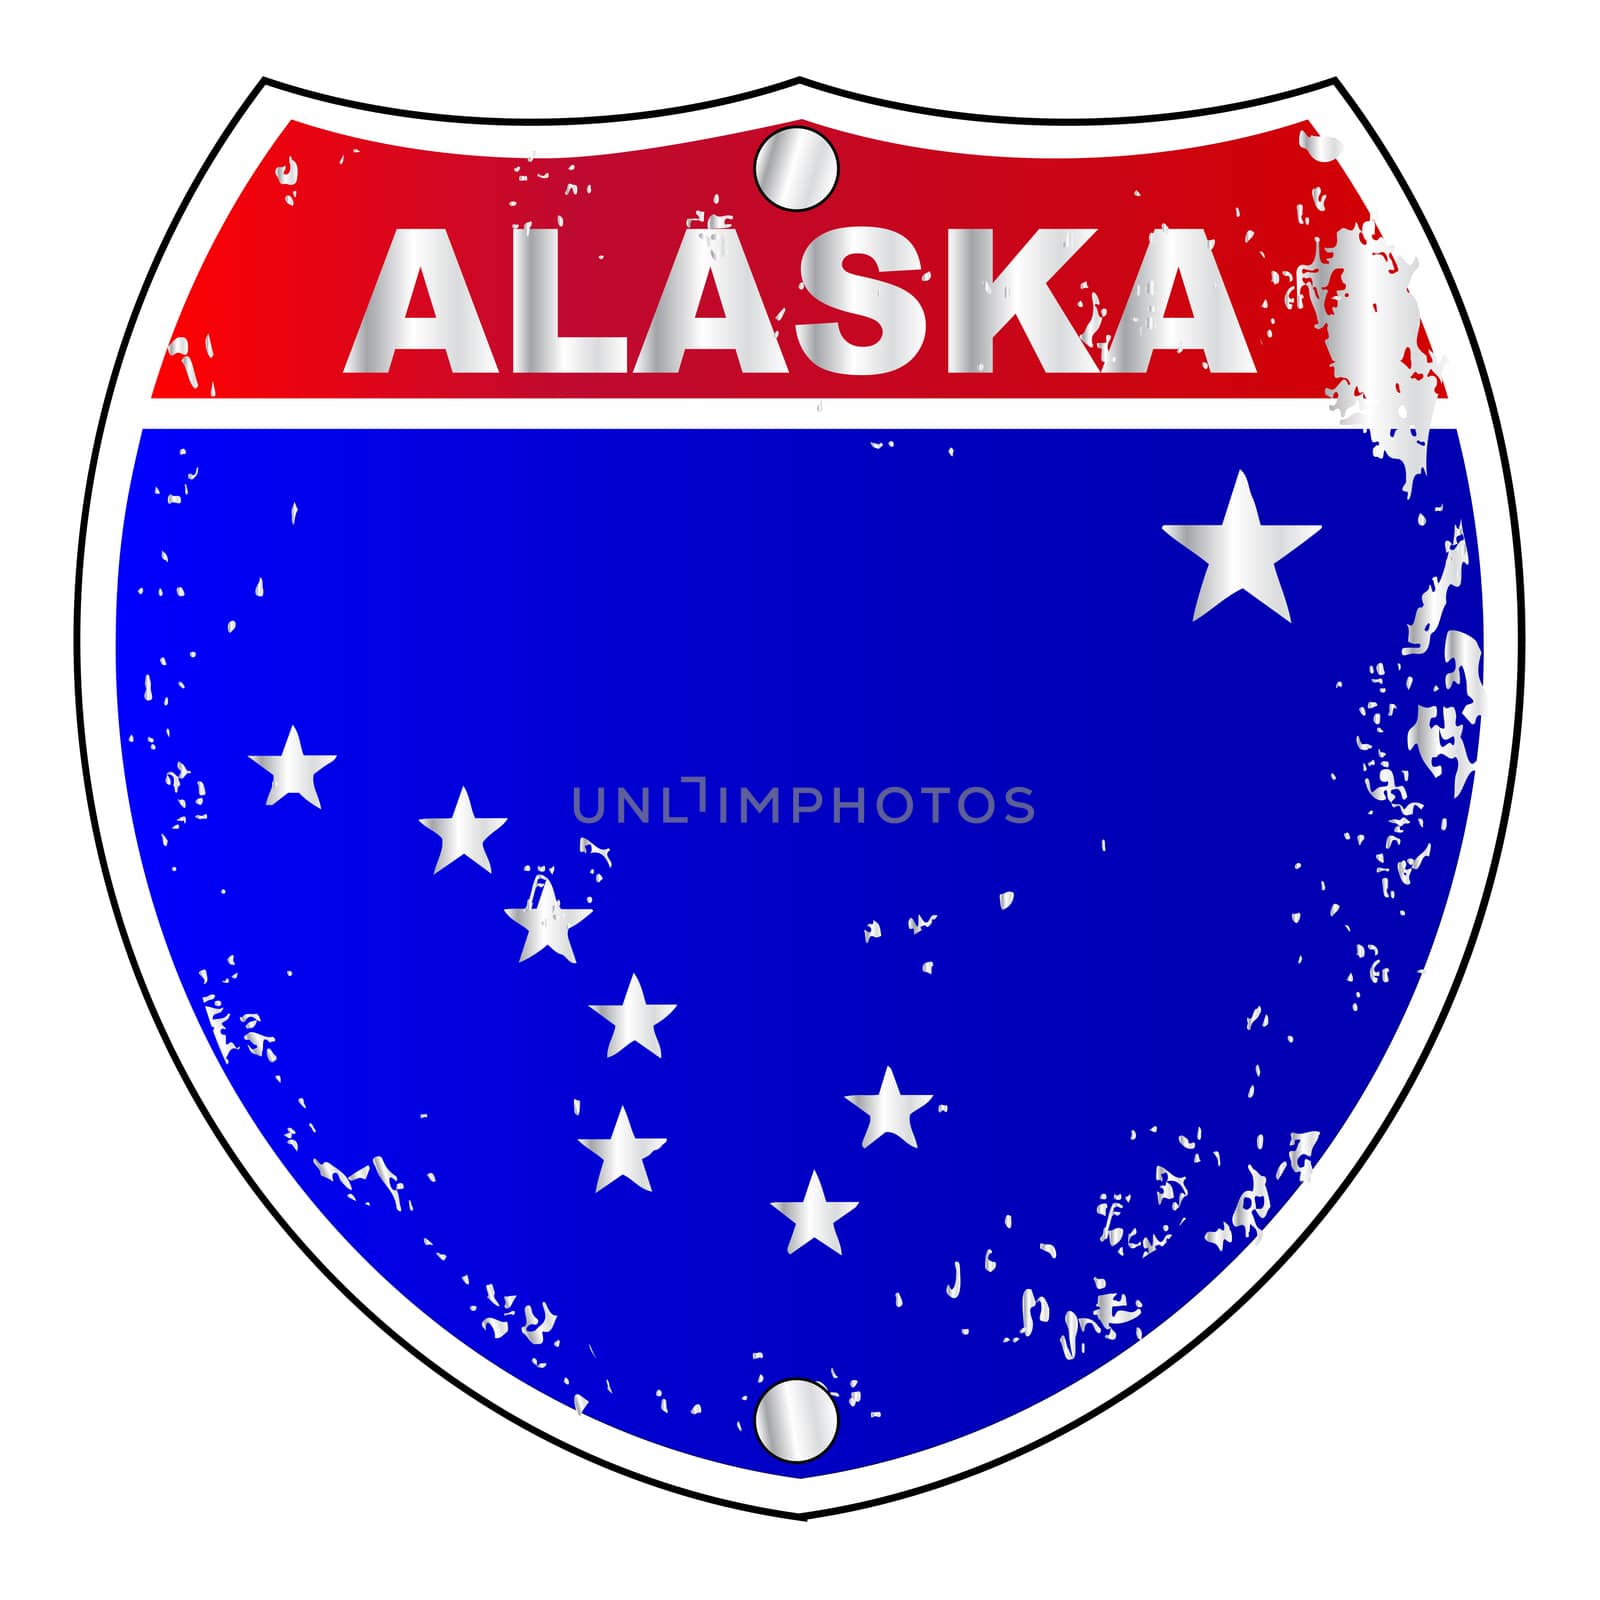 Alaska interstate sign with flag cross over a white background